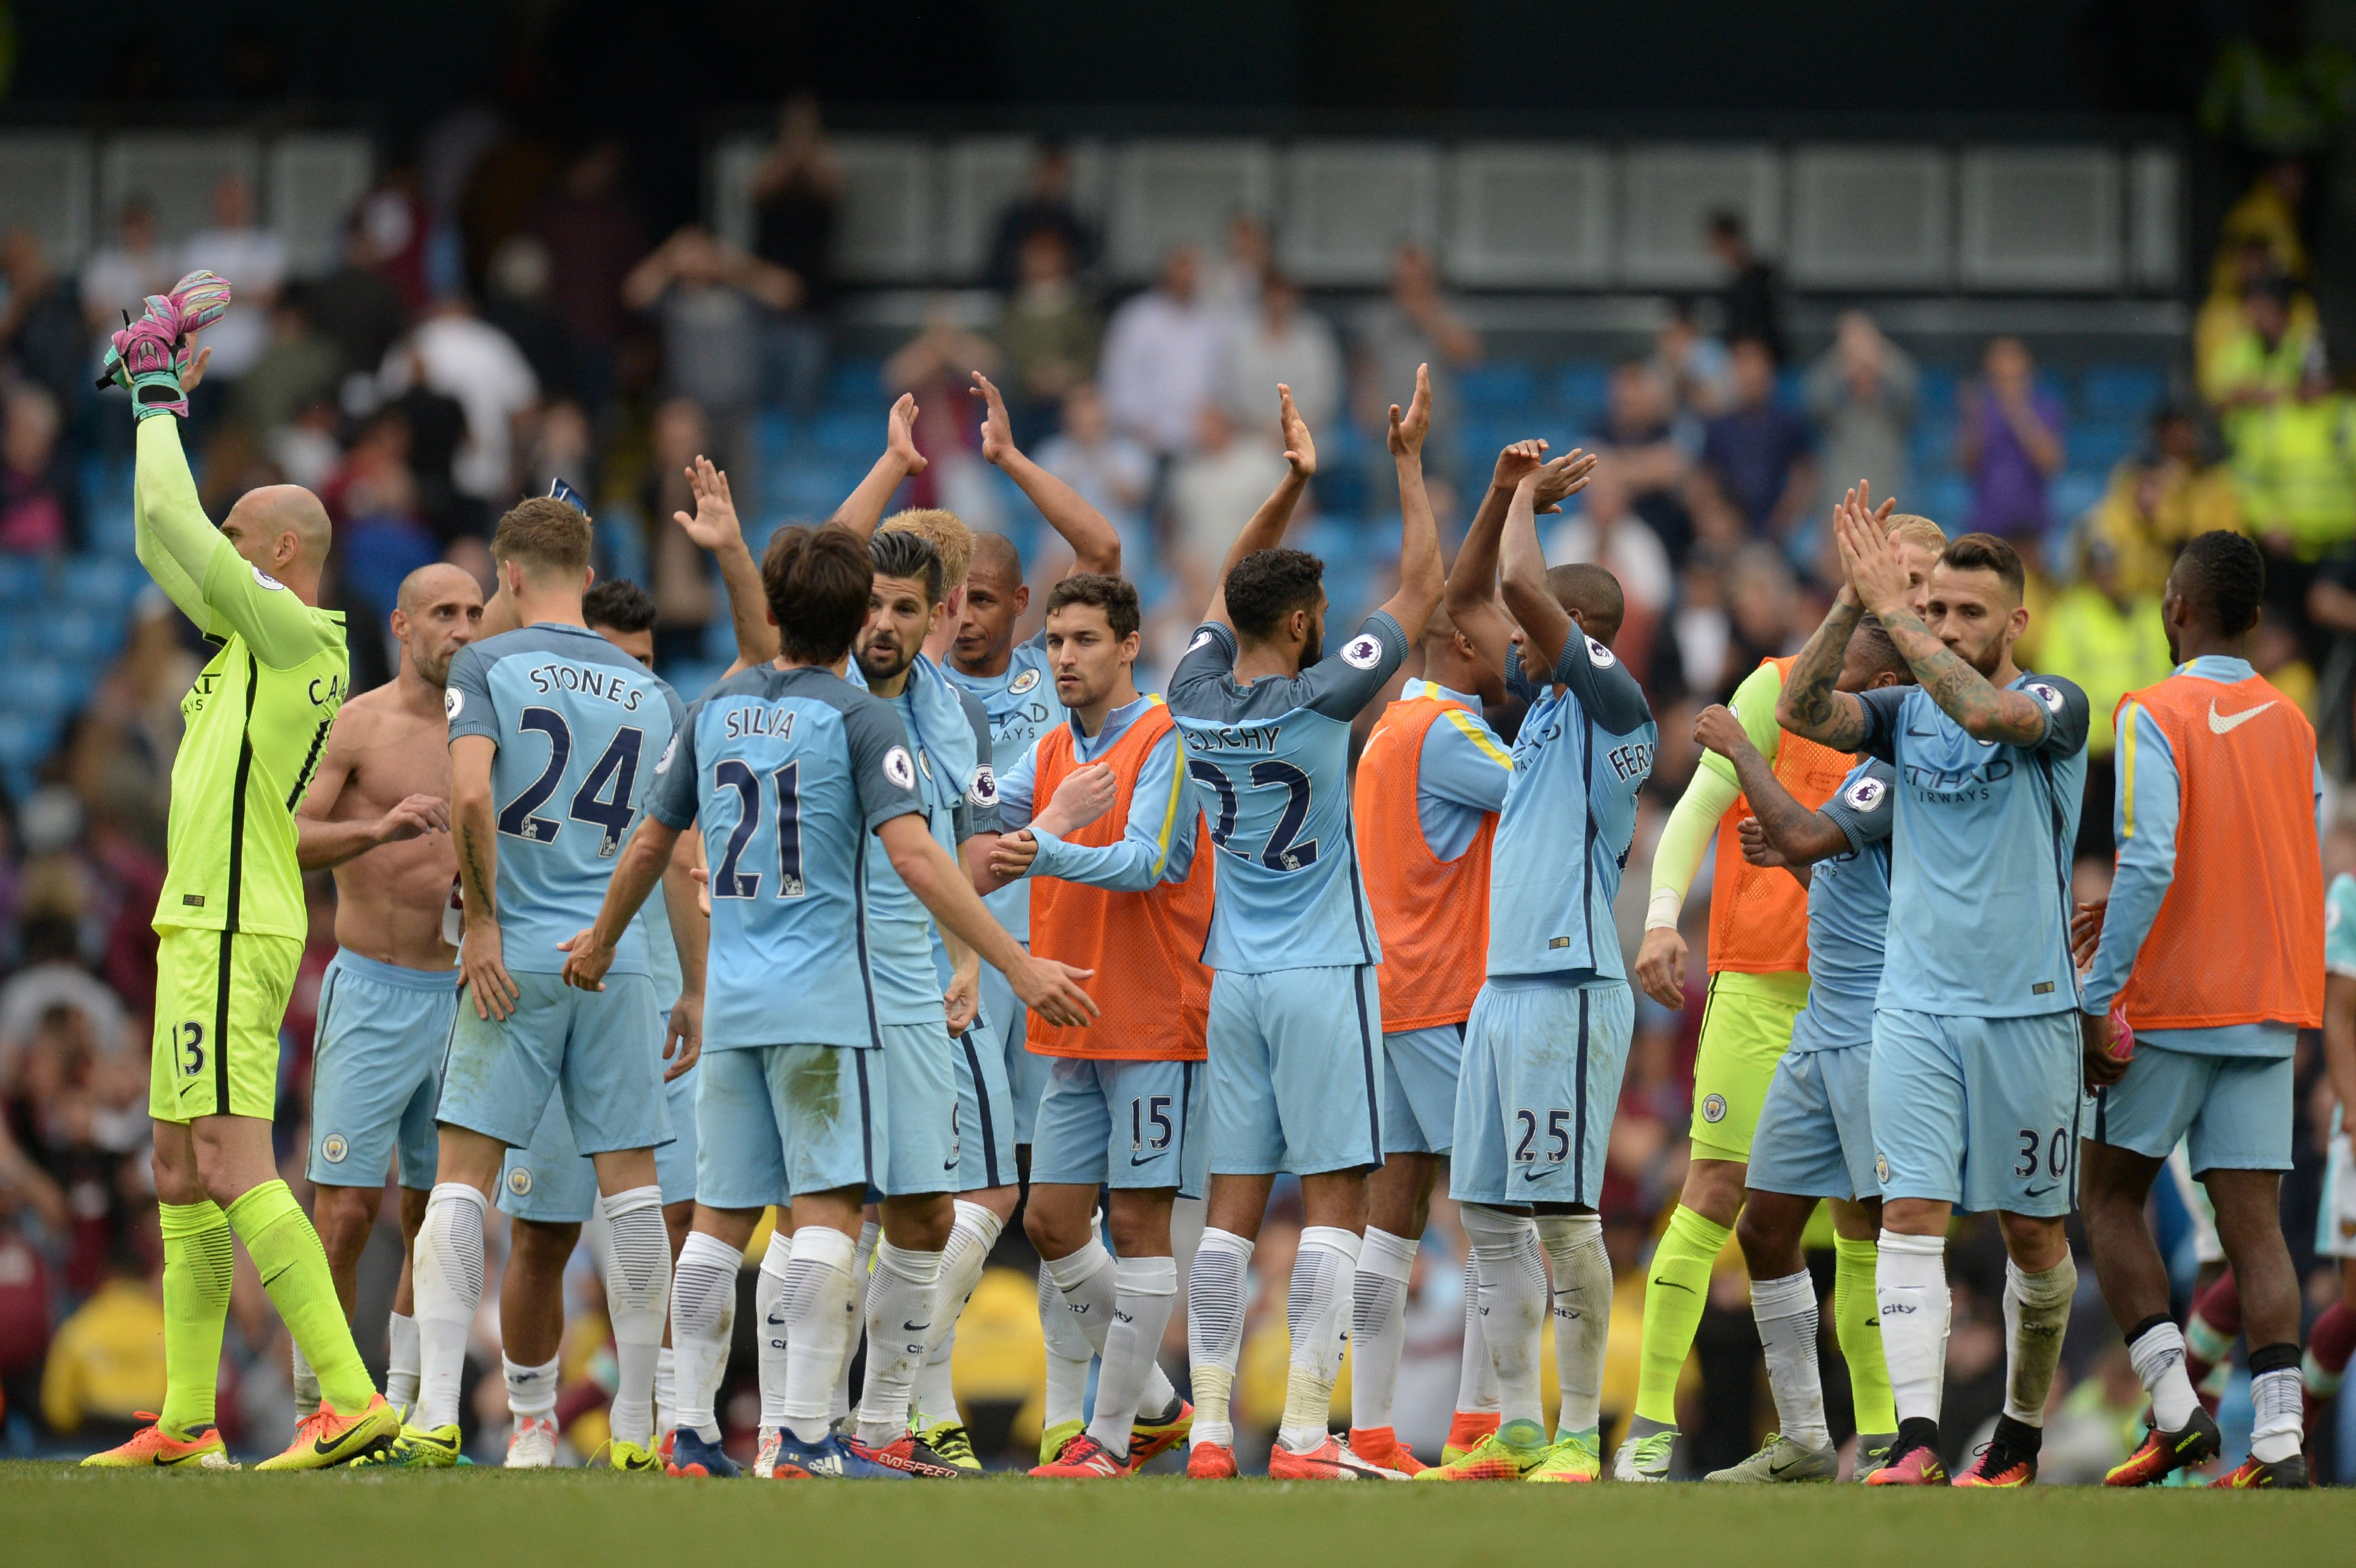 Manchester City players celebrate after winning the English Premier League football match between Manchester City and West Ham United at the Etihad Stadium in Manchester, north west England, on August 28, 2016. / AFP / OLI SCARFF / RESTRICTED TO EDITORIAL USE. No use with unauthorized audio, video, data, fixture lists, club/league logos or 'live' services. Online in-match use limited to 75 images, no video emulation. No use in betting, games or single club/league/player publications.  /         (Photo credit should read OLI SCARFF/AFP/Getty Images)